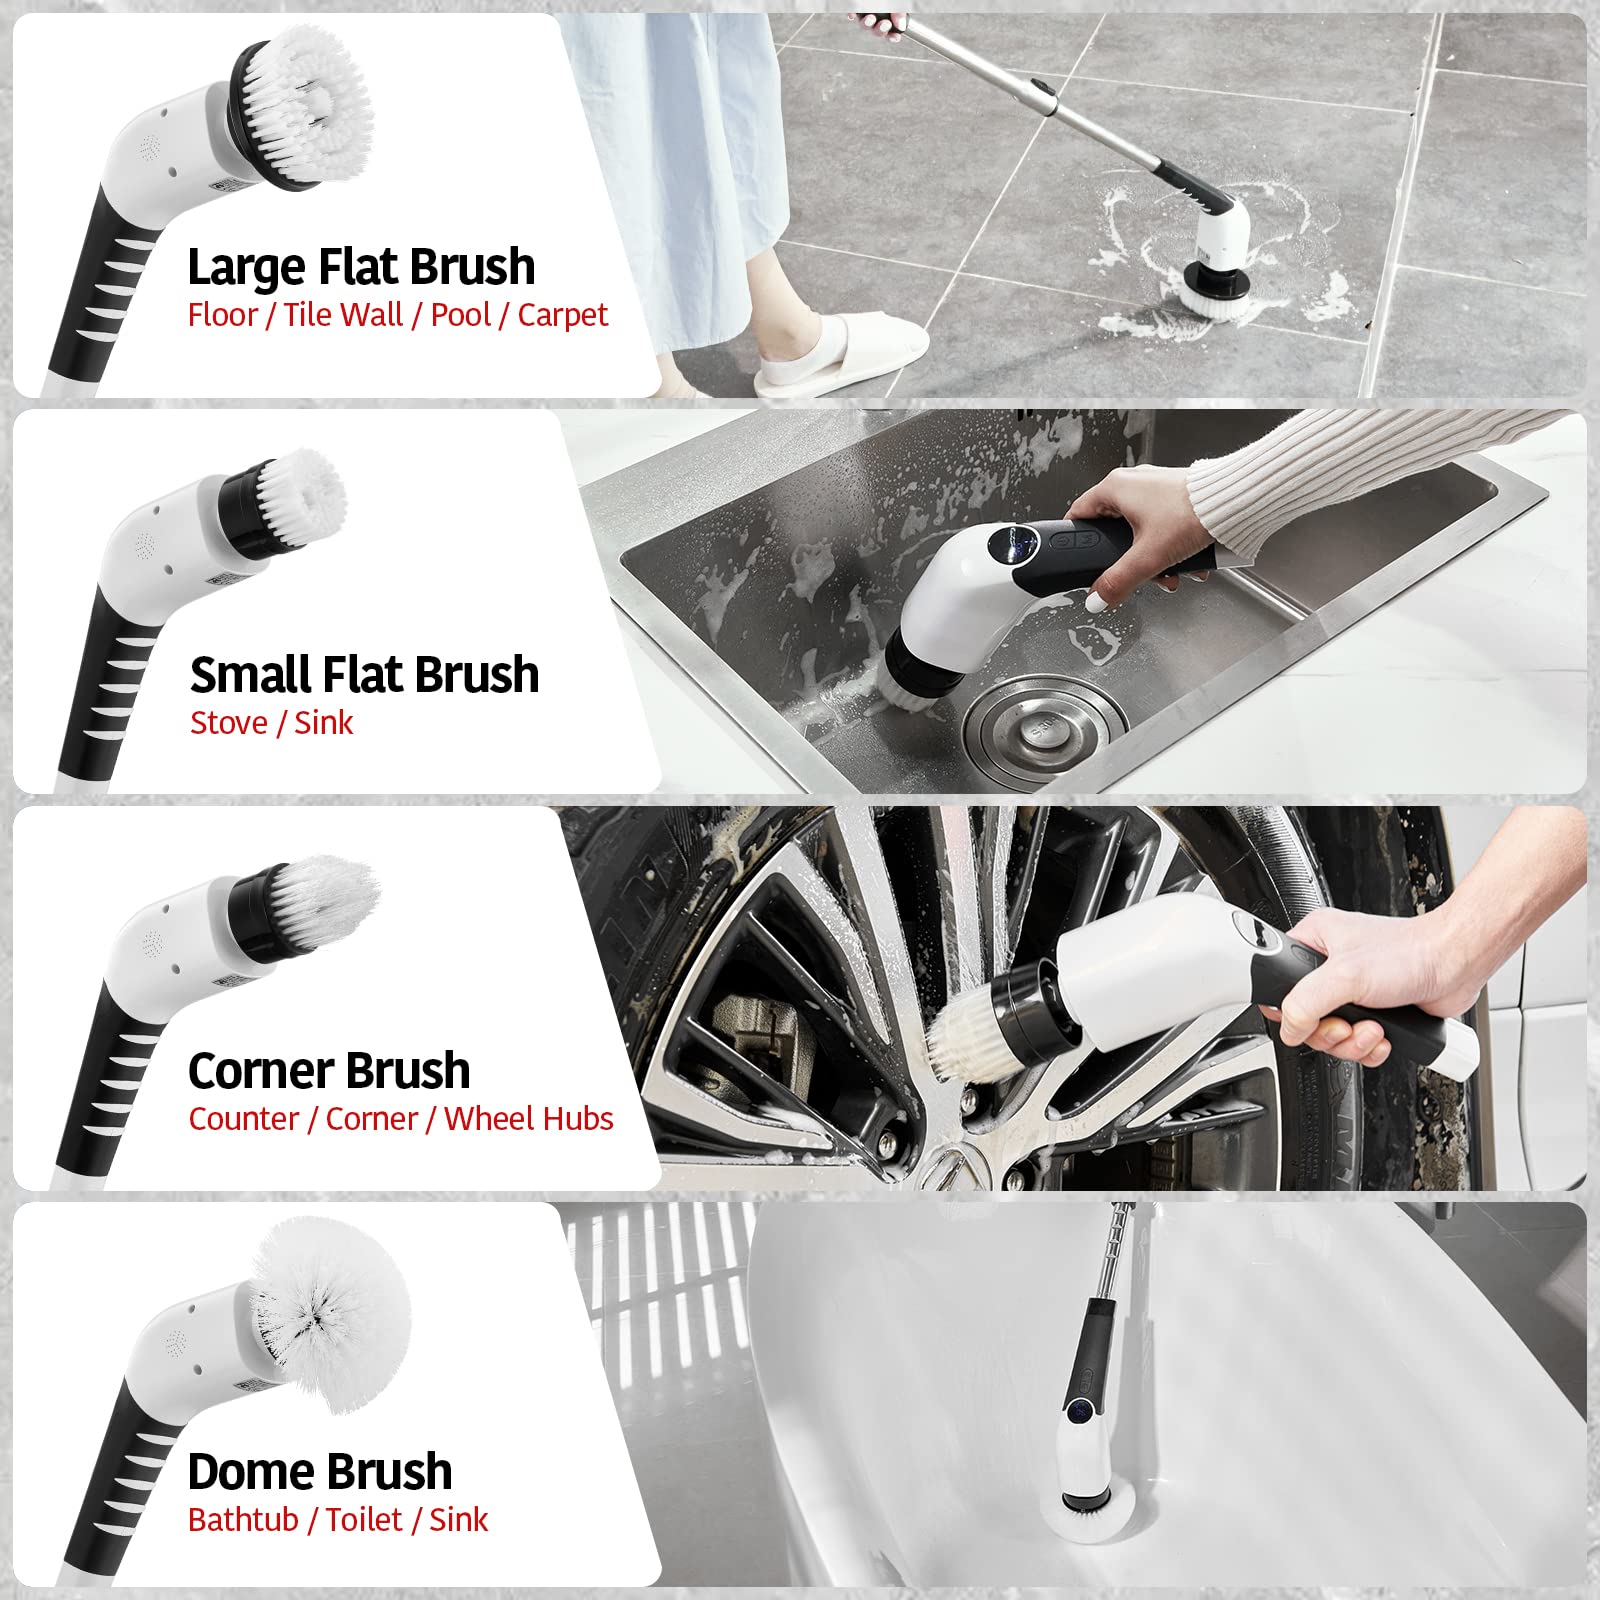 Keimi Electric Spin Scrubber, 2023 New Cordless Voice Prompt Shower Cleaning Brush with 8 Replaceable Brush Heads, 3 Adjustable Speeds, and Adjustable Extension Handle for Bathroom Floor Tile